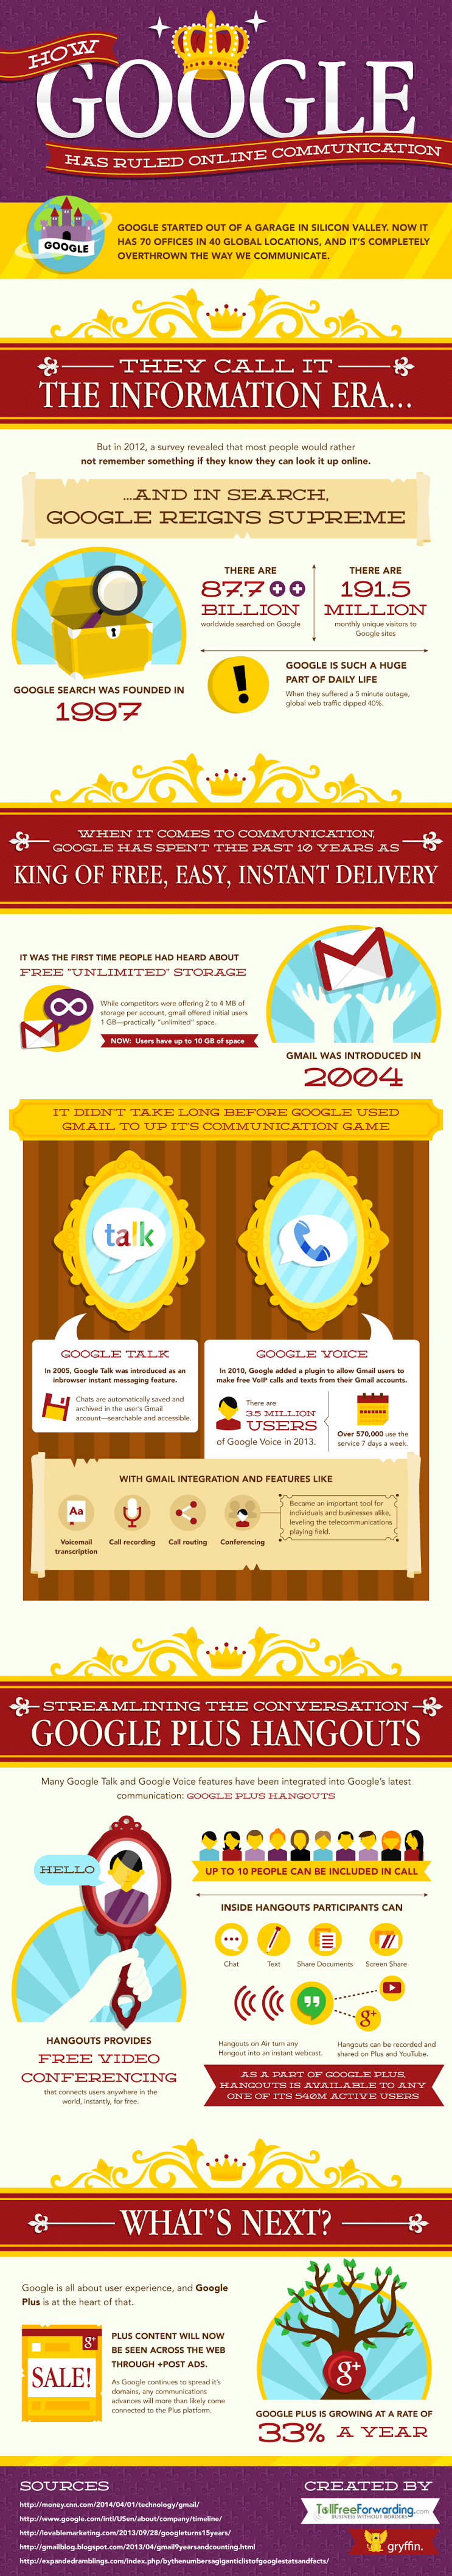 How Google Has Ruled Online World - #infographic #Google